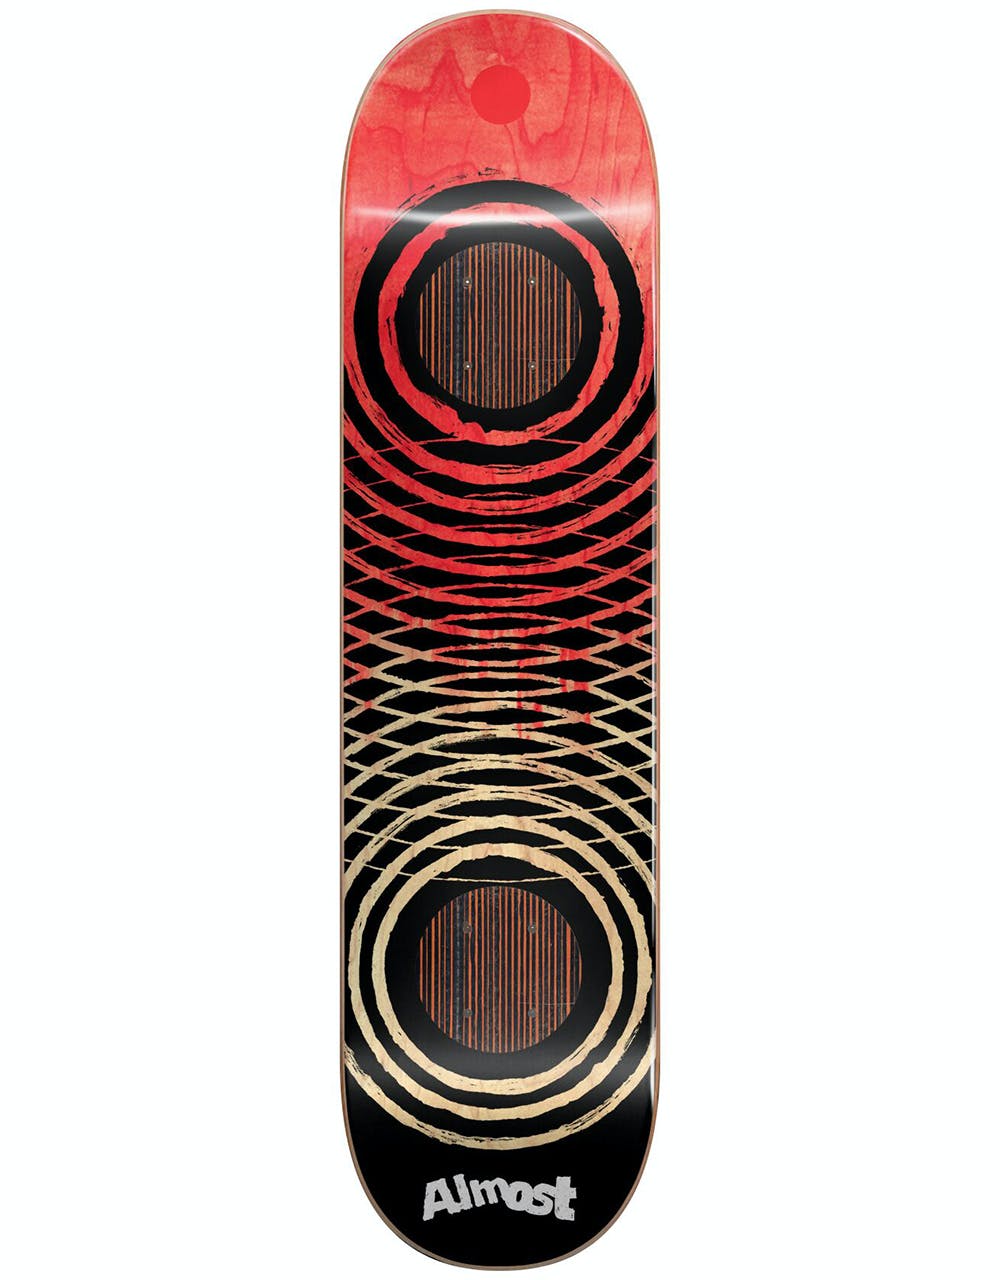 Almost Painted Rings Impact Support Skateboard Deck - 8.25"